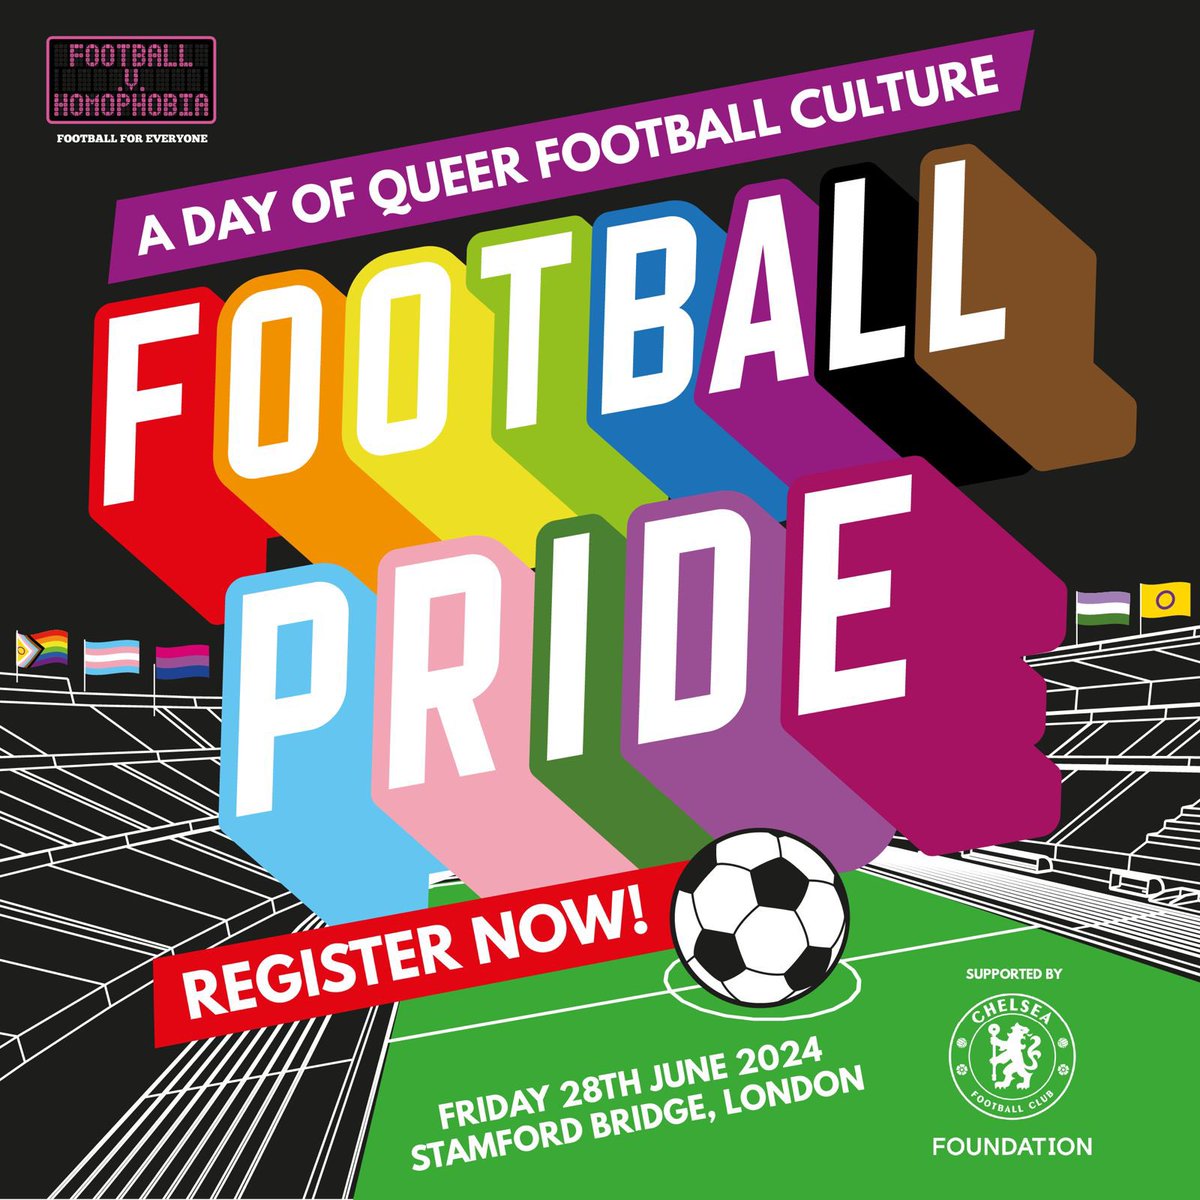 #FootballPride 2024 is coming to London on Friday 28 June 🏳️‍🌈🏳️‍⚧️🥳 Building on the success of last year’s event in MCR, Football Pride will be held at Chelsea FC on the day before the annual Pride in London parade with support from @CFCFoundation Tickets: eventbrite.co.uk/e/football-pri…